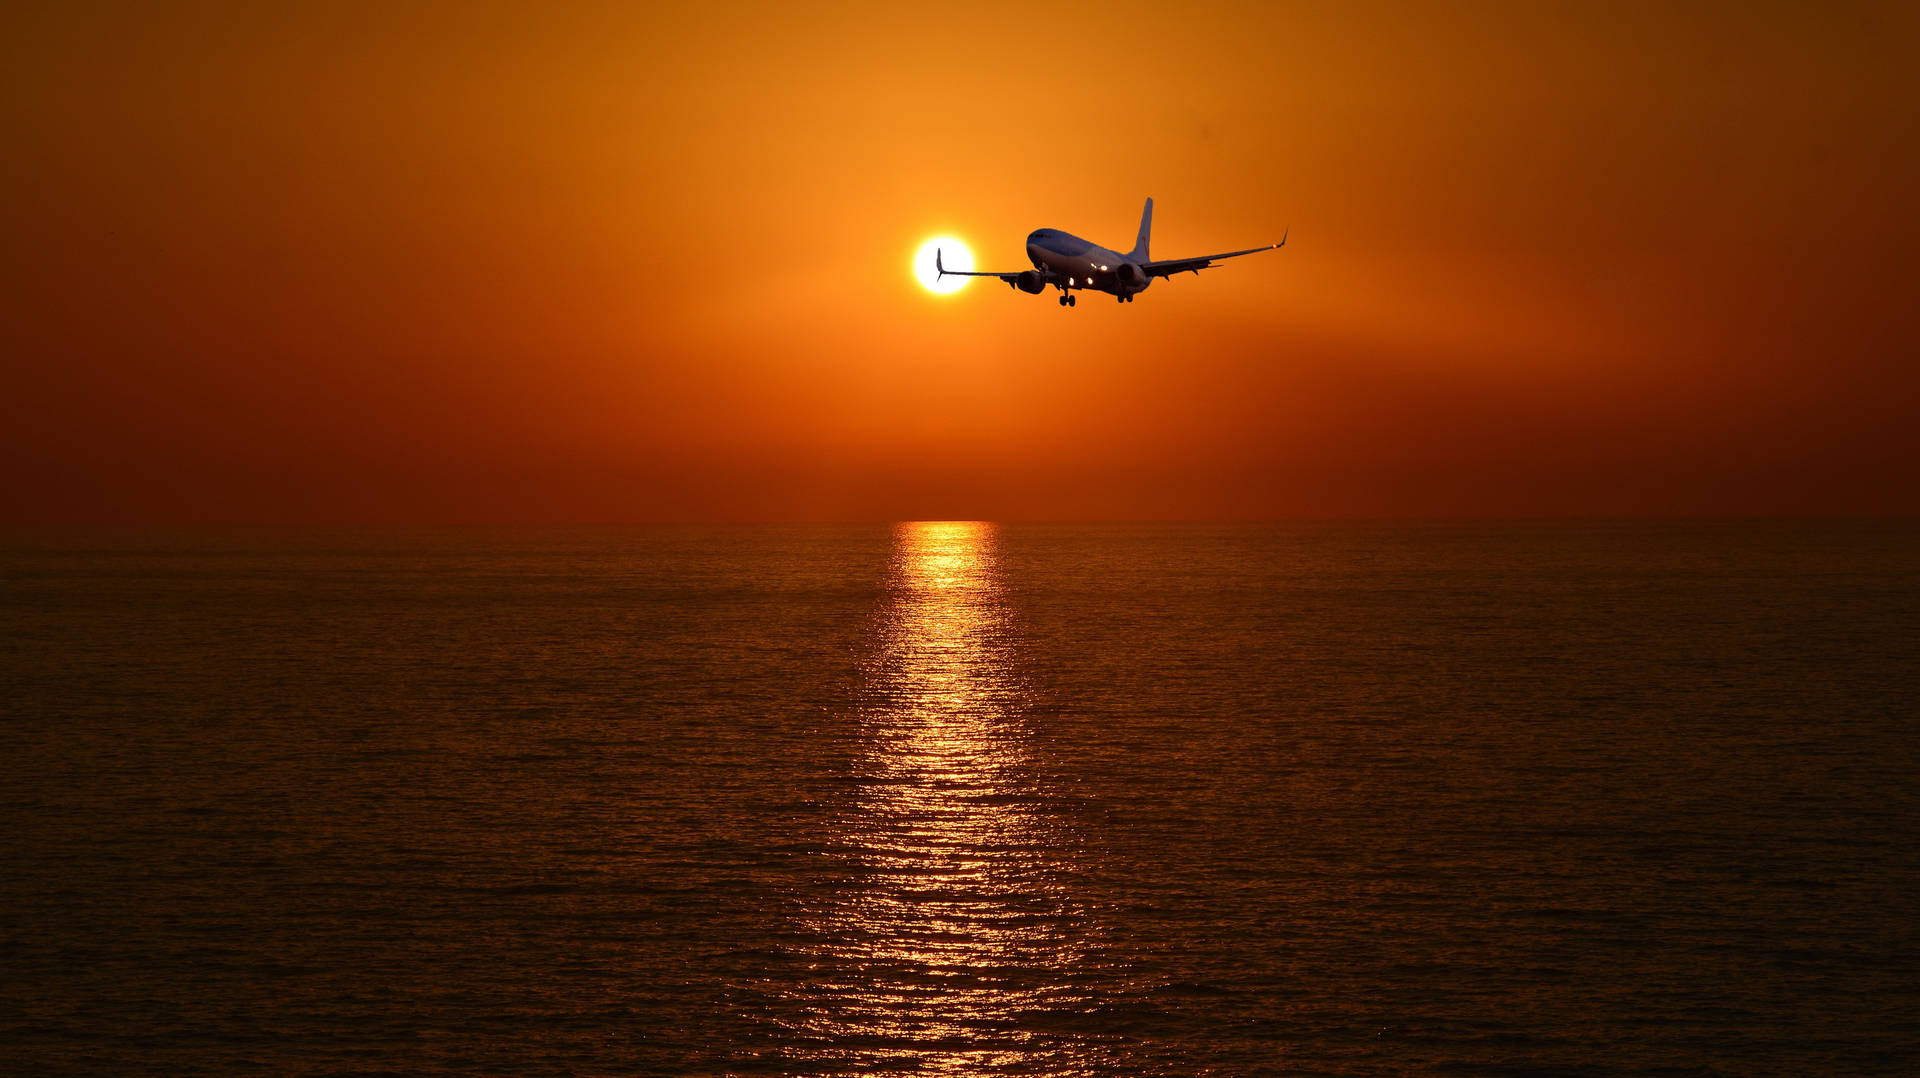 Hd Plane Flying Into Sunset Background